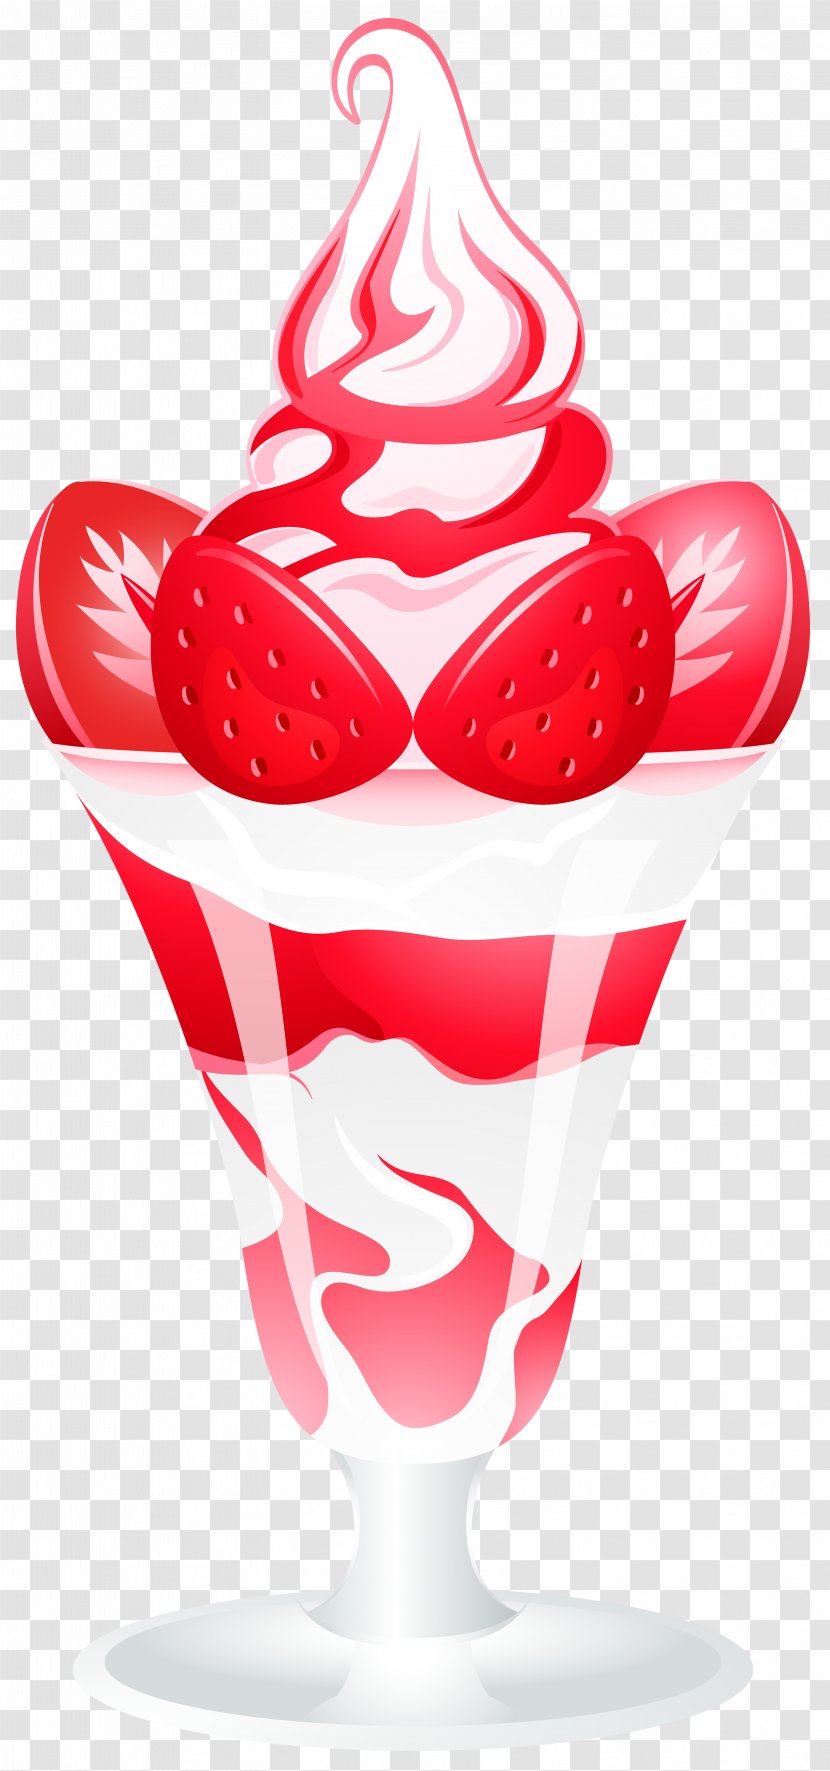 Ice Cream Cone Sundae Strawberry - Food - With Strawberries Clip Artt Image Transparent PNG